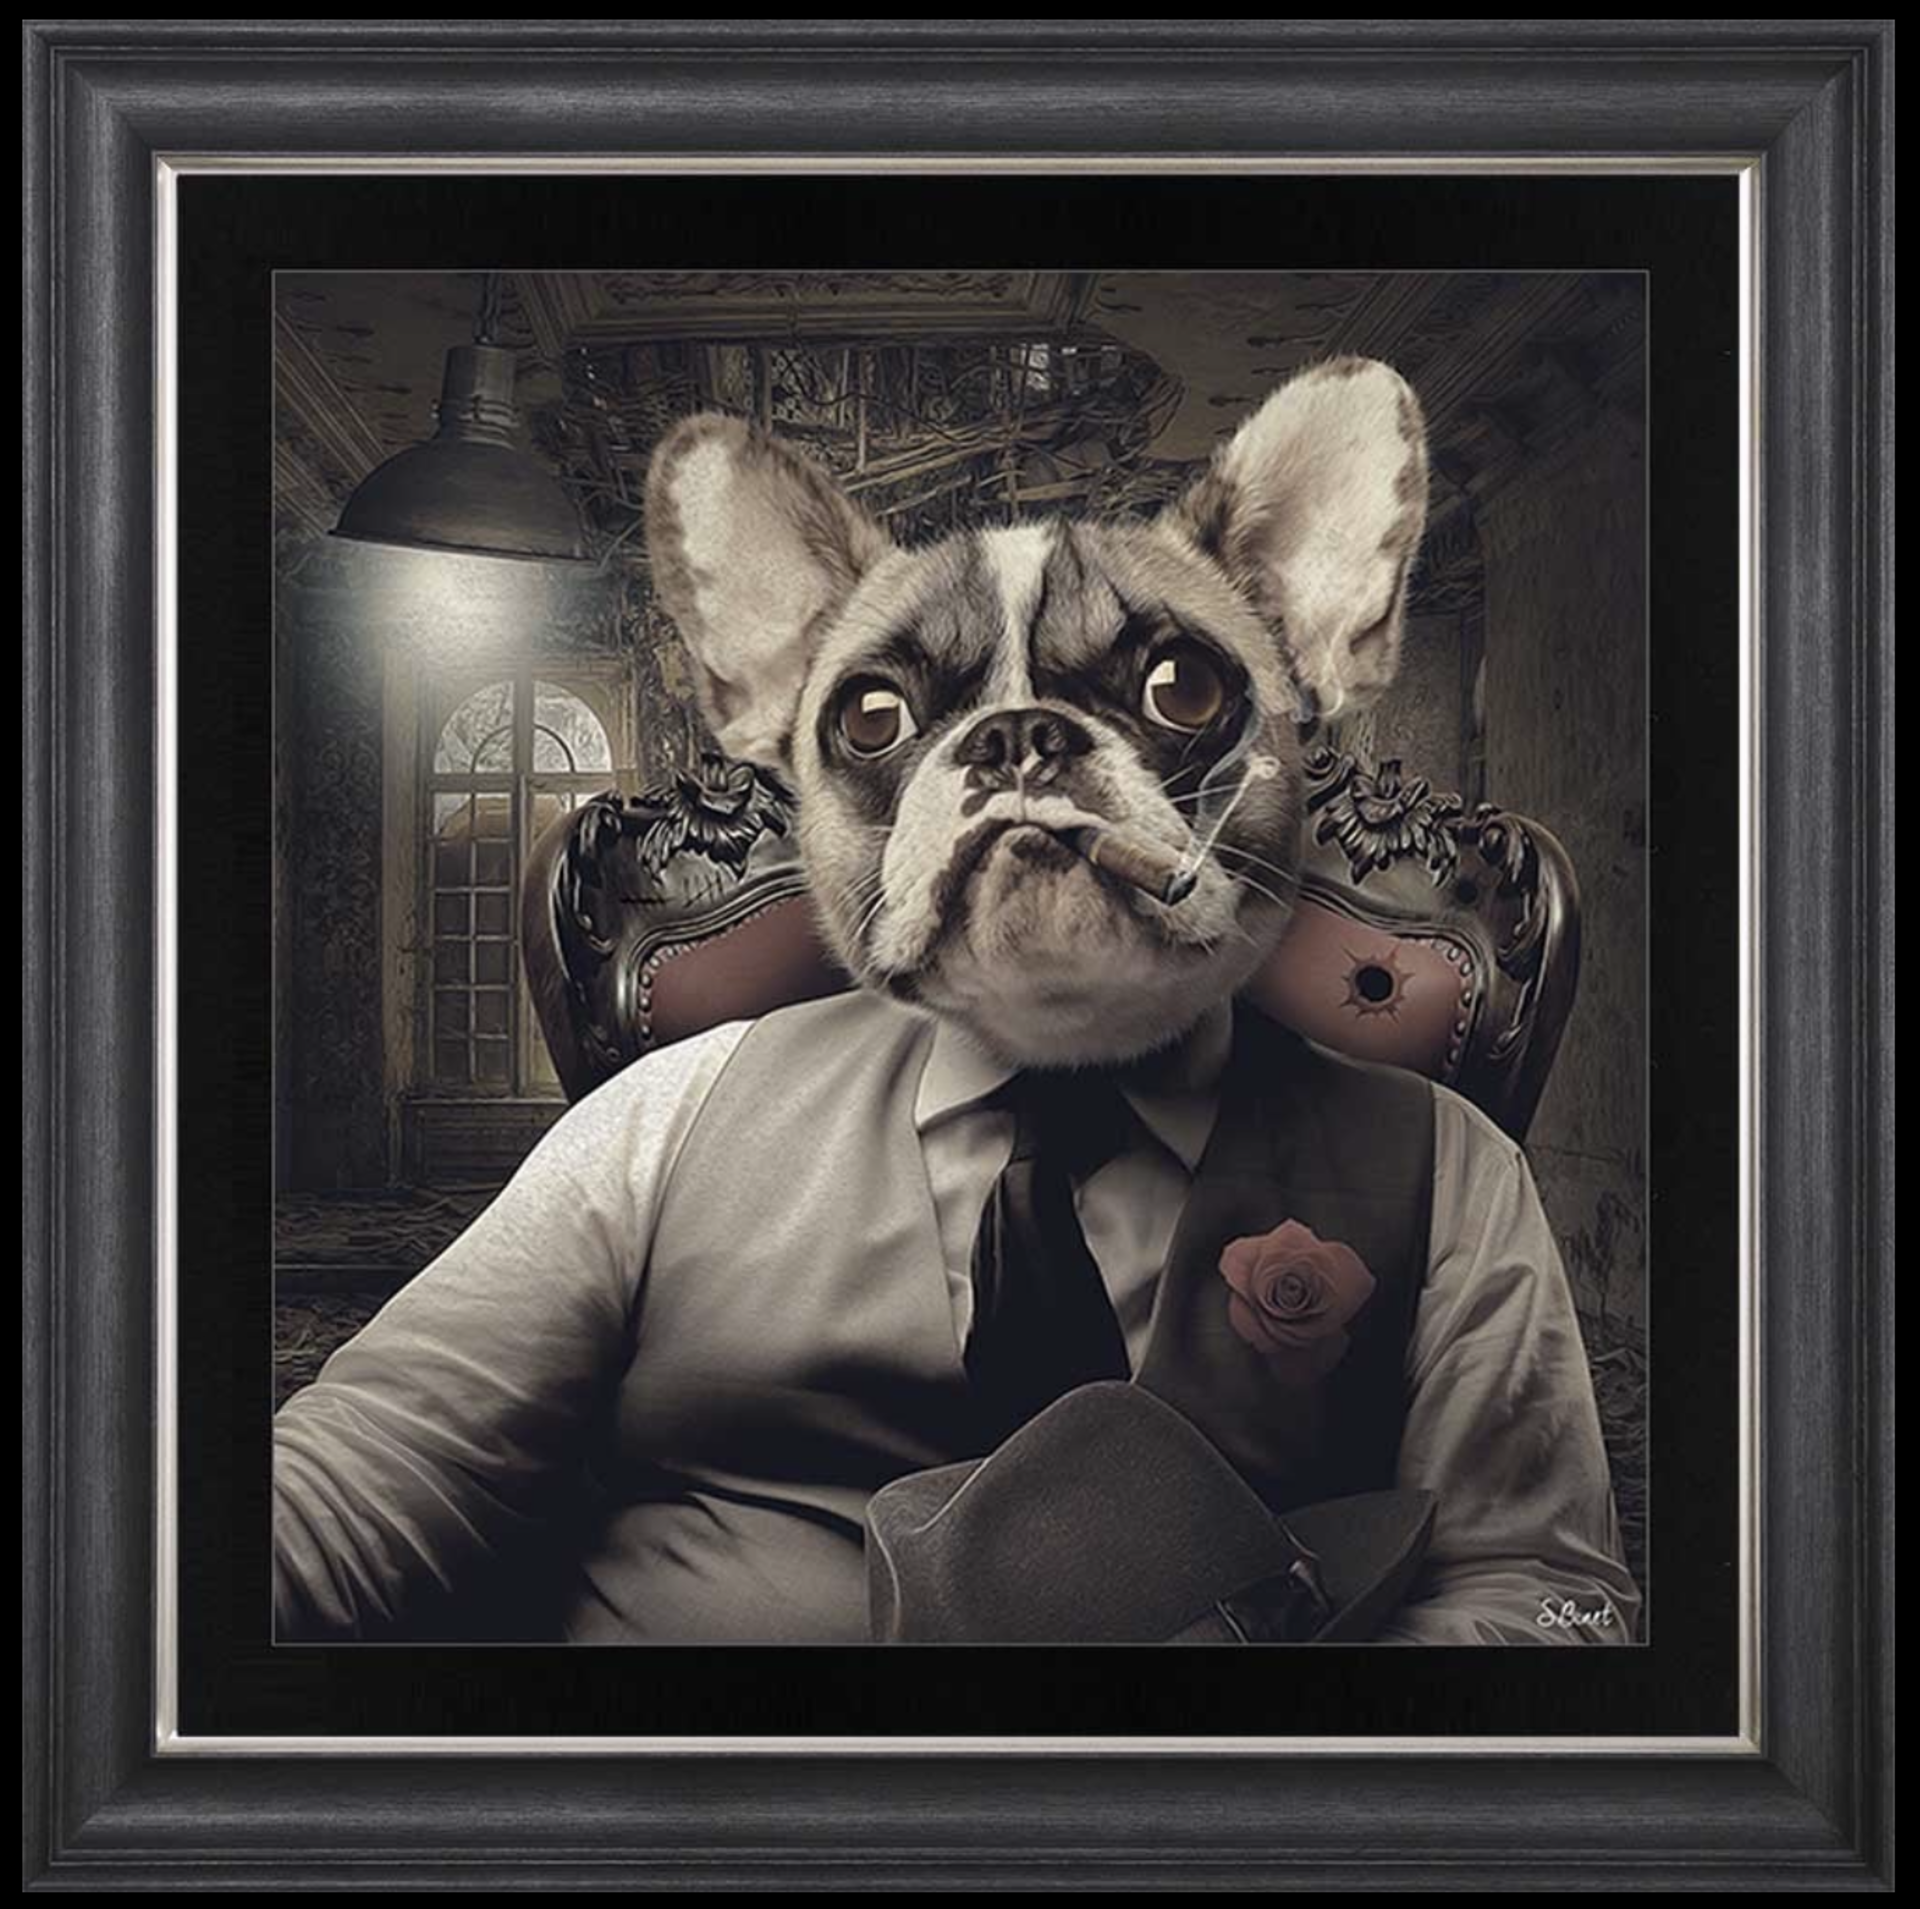 Frenchie The Boss framed art piece by Sylvain Binet - Brand New - Quality UK Manufactured - Image 3 of 4